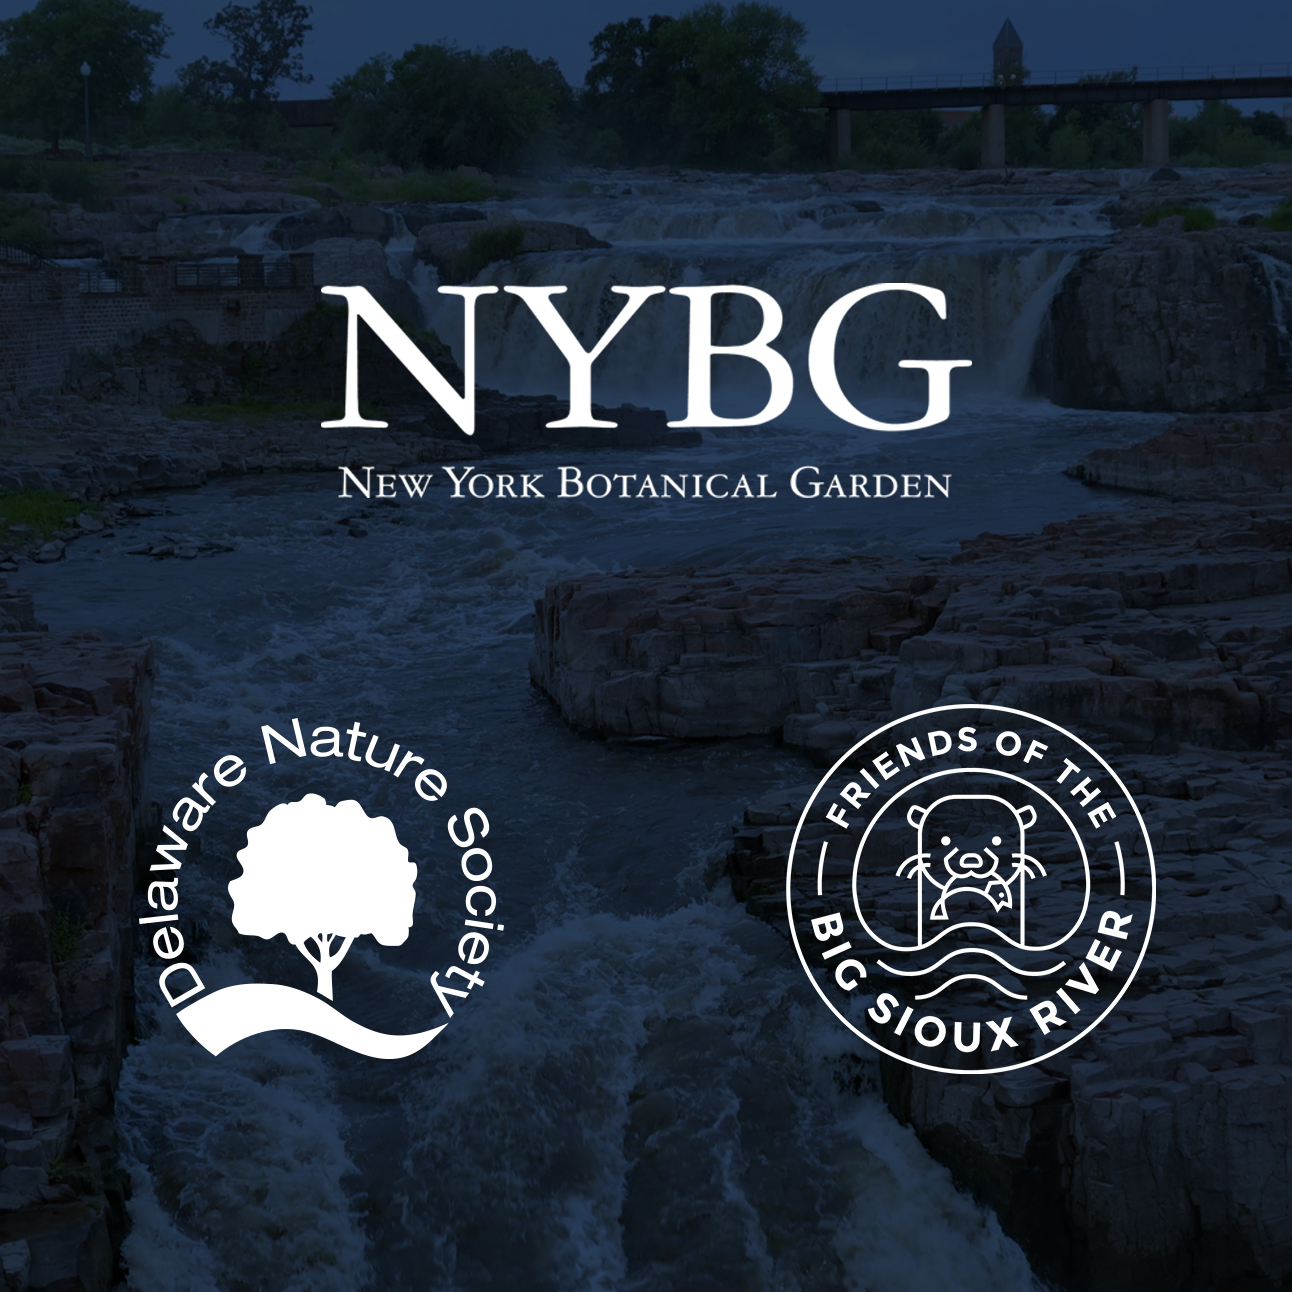 NYBG - Delaware Nature Society - Friends of the Big Sioux River